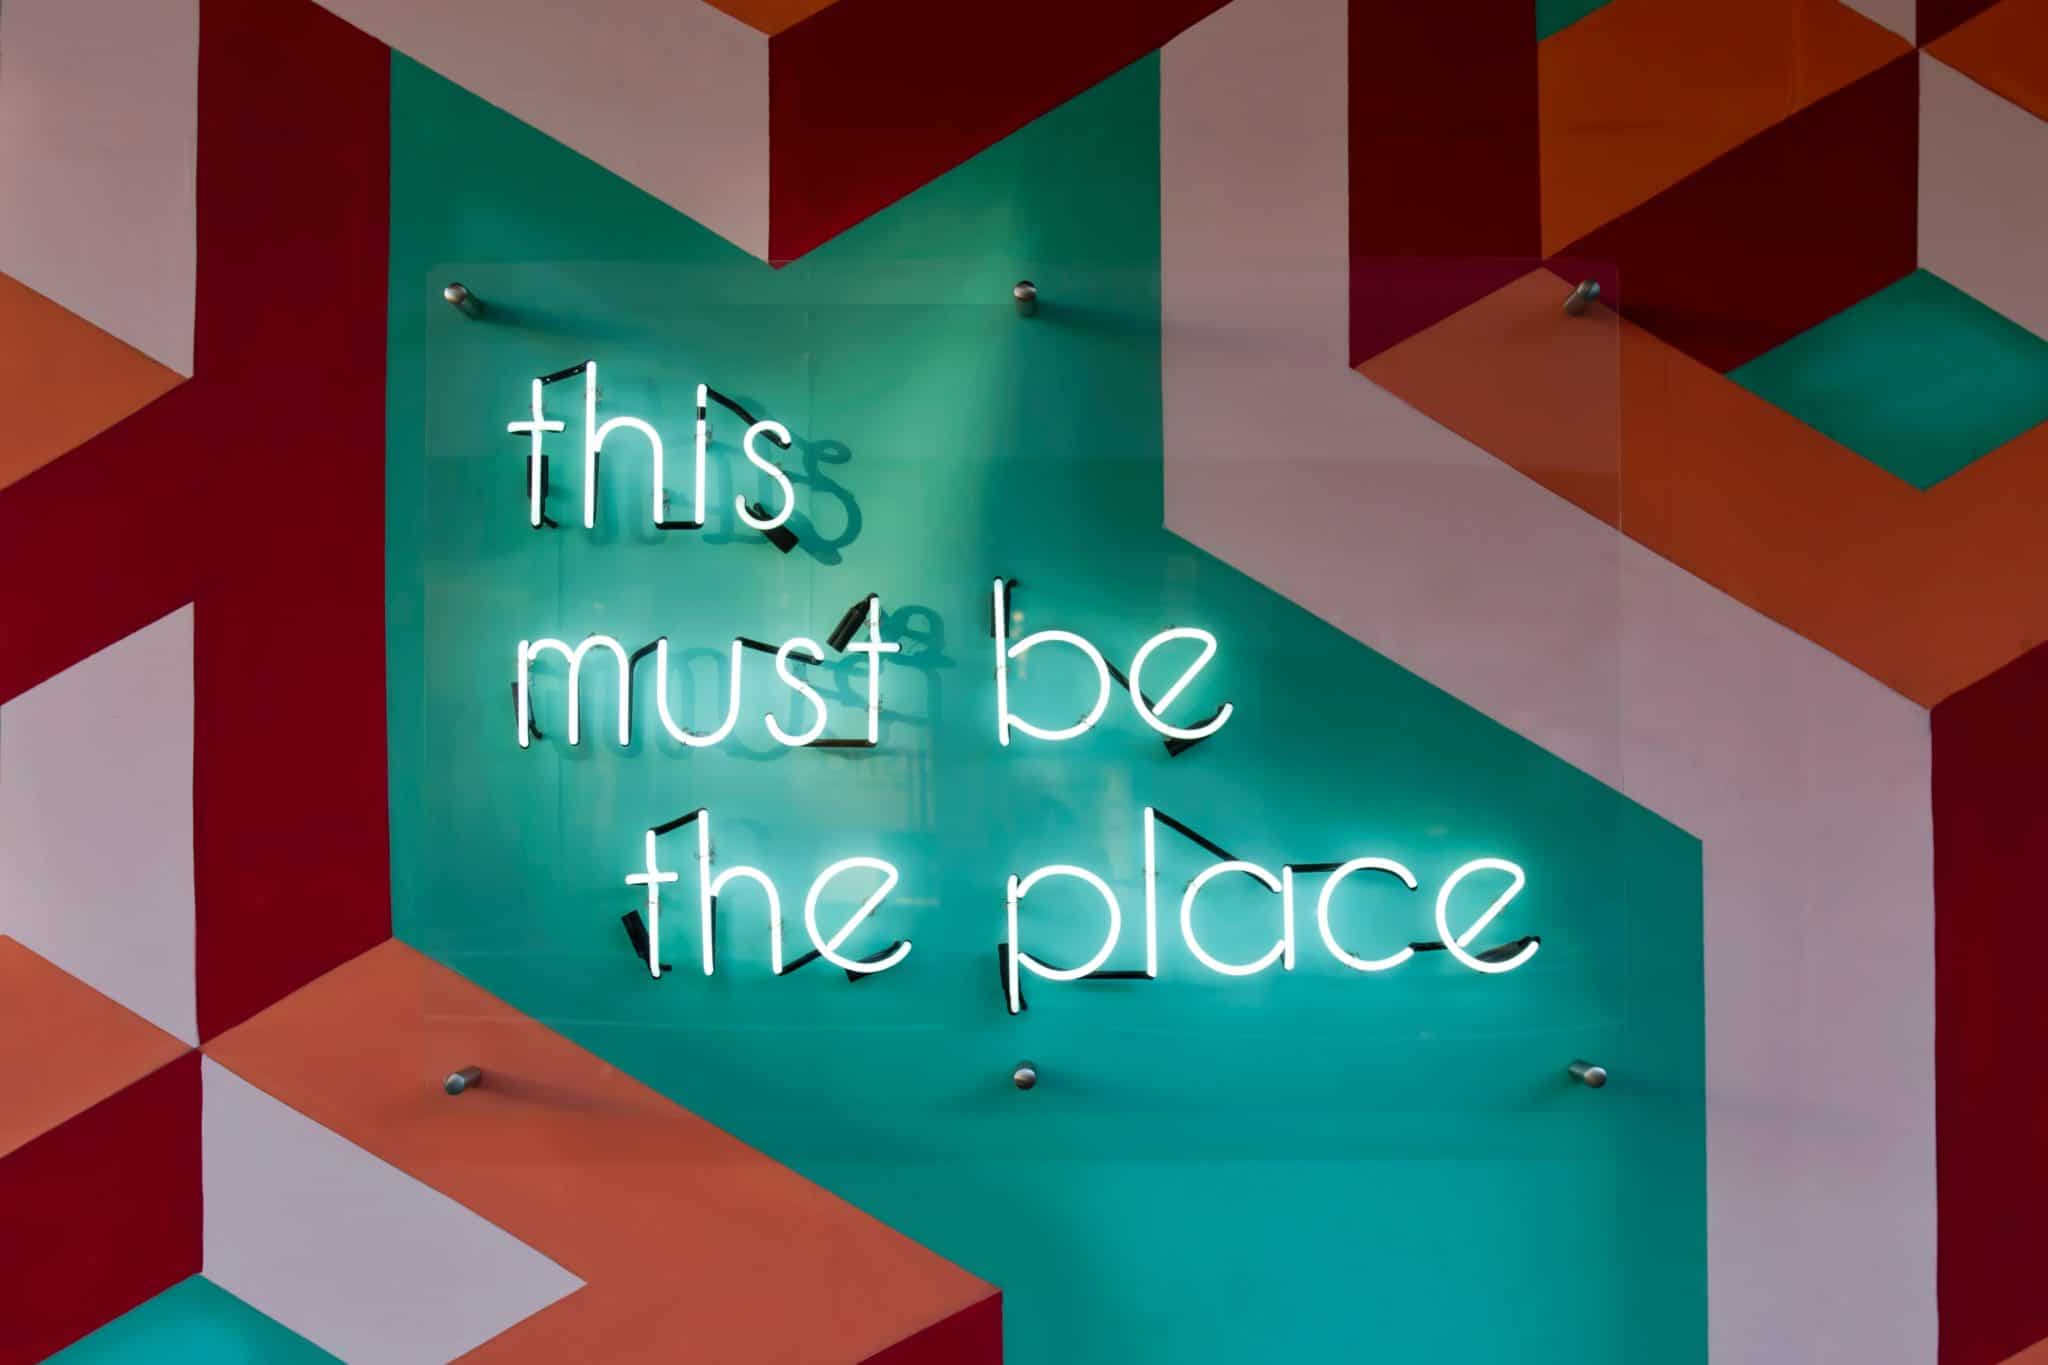 "This must be the place" written in lights on an artistic modernist patterned wall